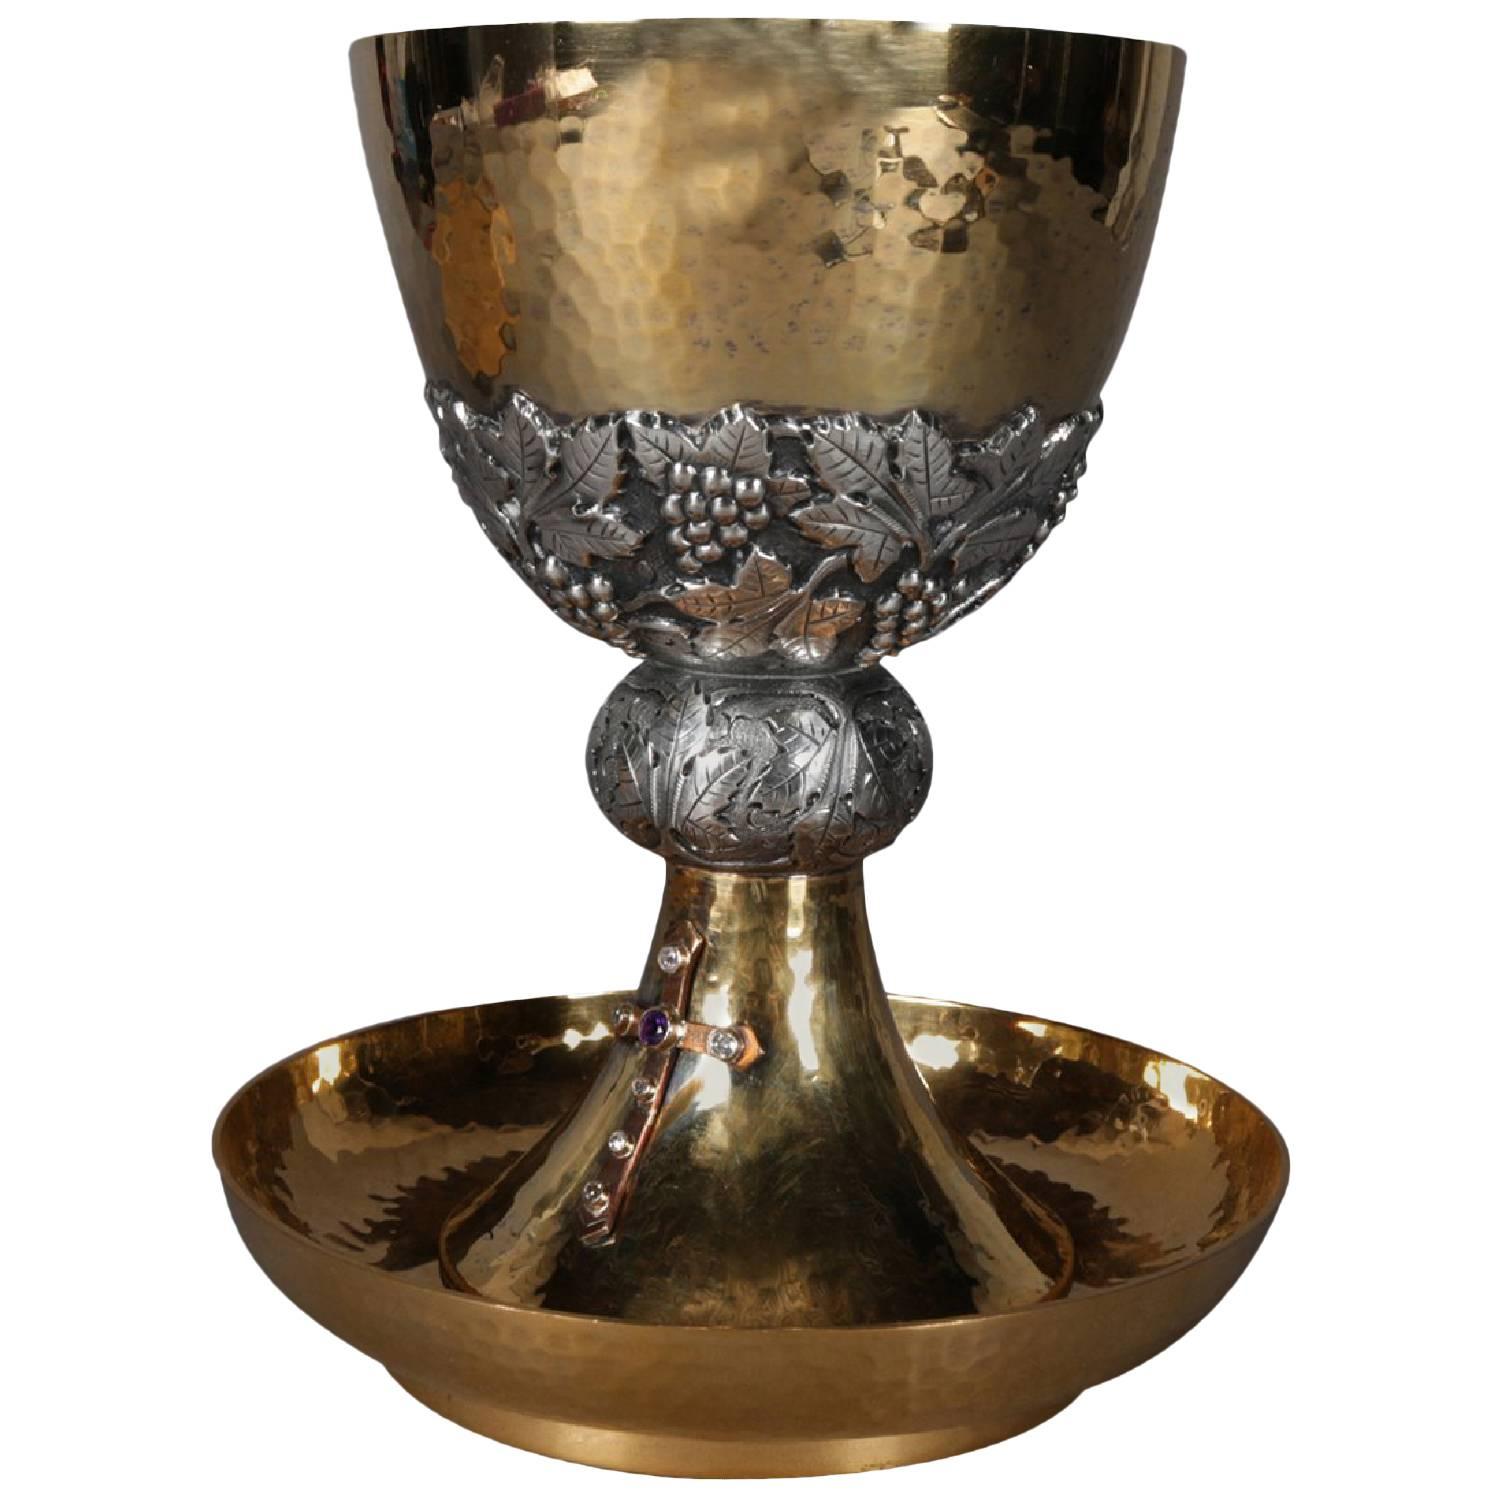 Jeweled Hand-Hammered Brass Communion Chalice with Cross, Made in Spain